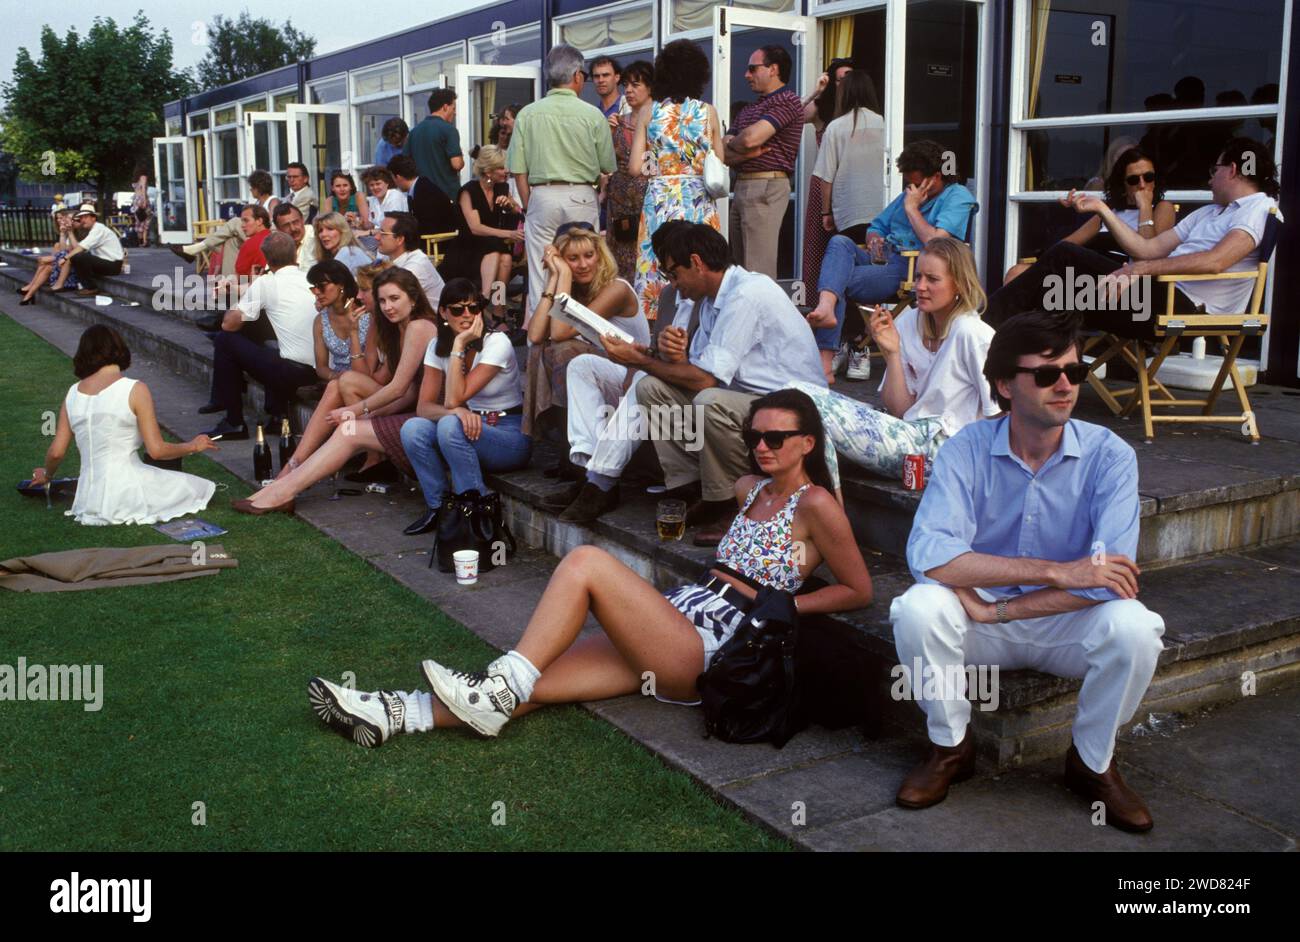 1980s UK fashion a young woman wearing British Knights - BK urban fashion trainers, a cropped top and stylish stripped 1970s hot pants, black leather gloves and matching leather handbag. Dark glasses were de rigueur for the wealthy, casual polo groupies frequenting the Guards Polo Club in Windsor Great Park. Windsor, Berkshire, England circa June 1985 HOMER SYKES Stock Photo